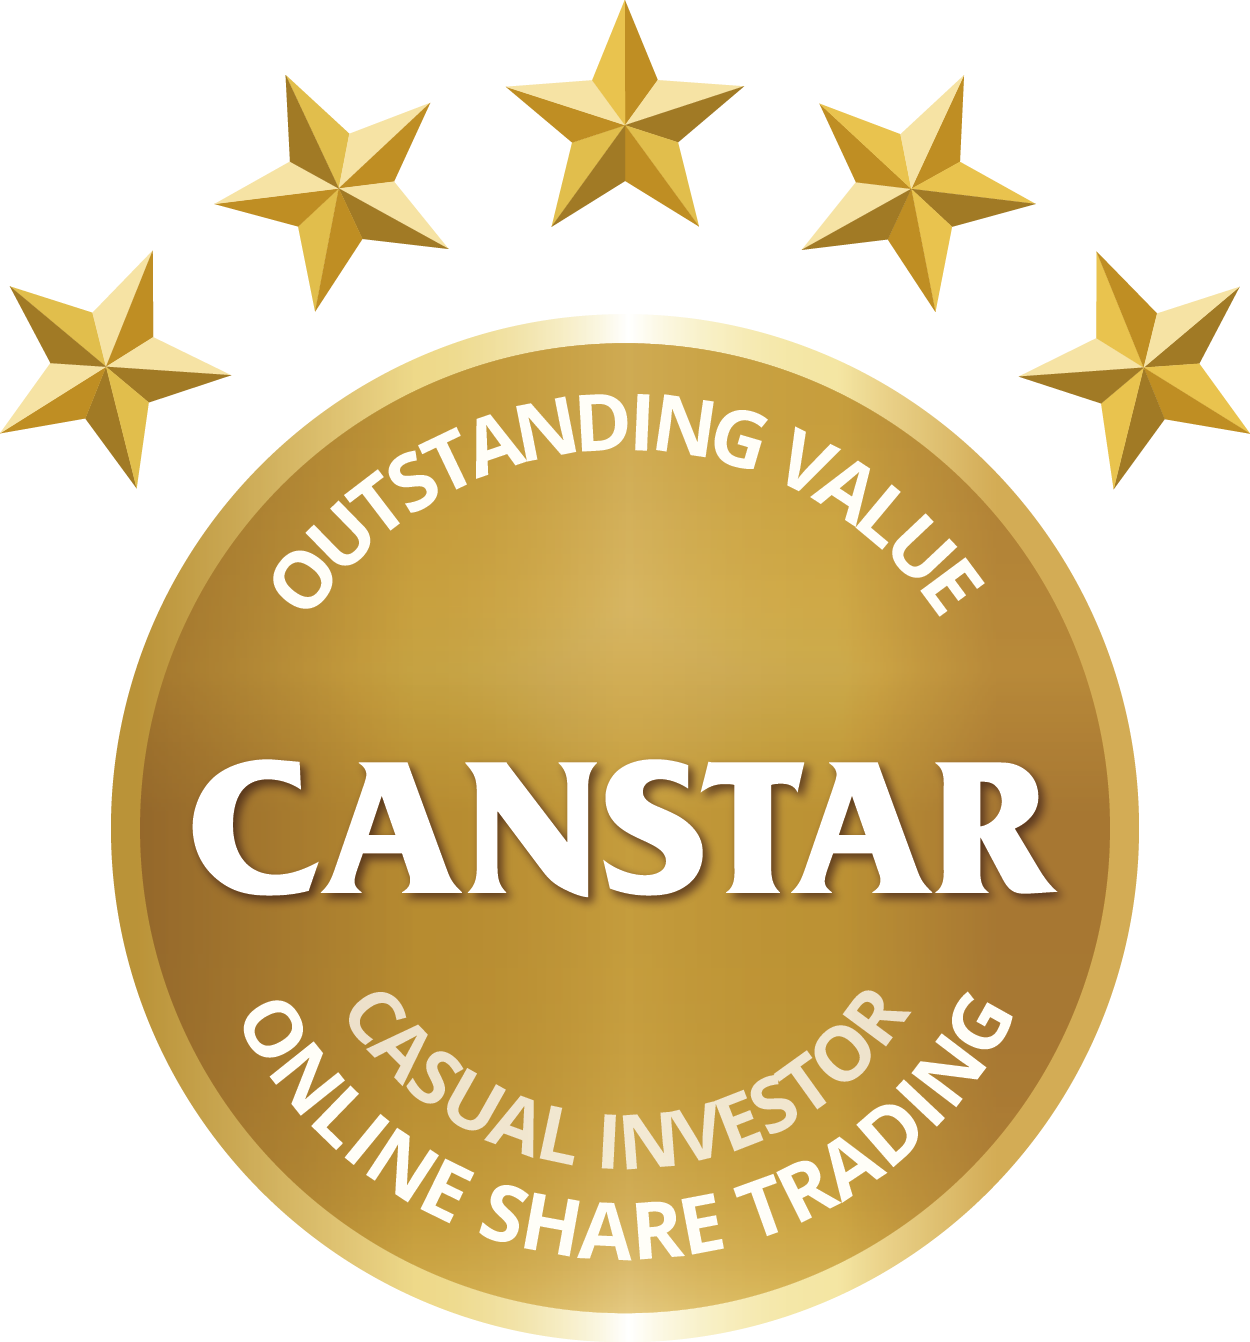 Canstar Outstanding Value for Casual Investors